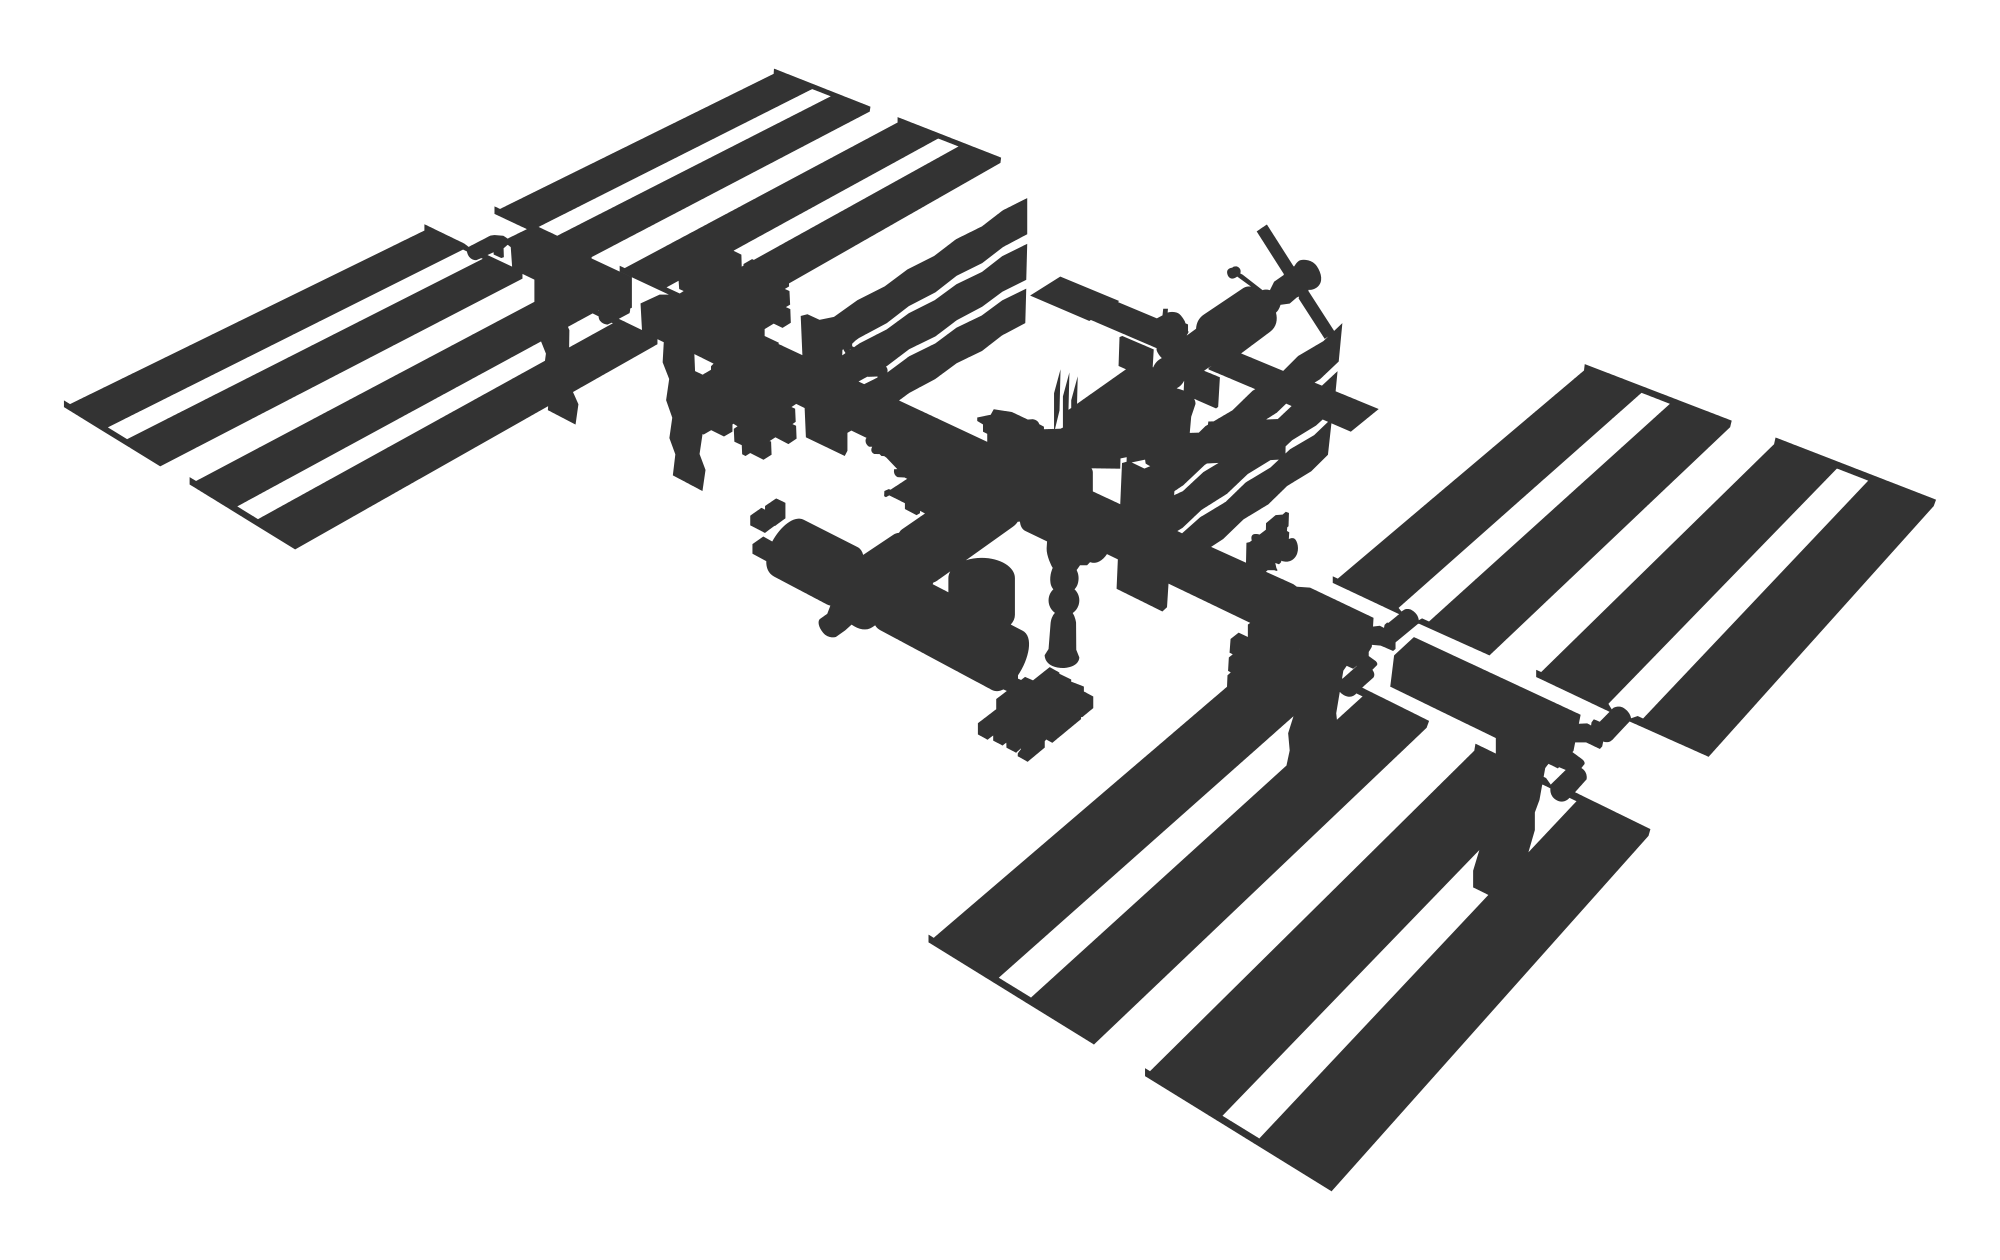 International Space Station svg #20, Download drawings